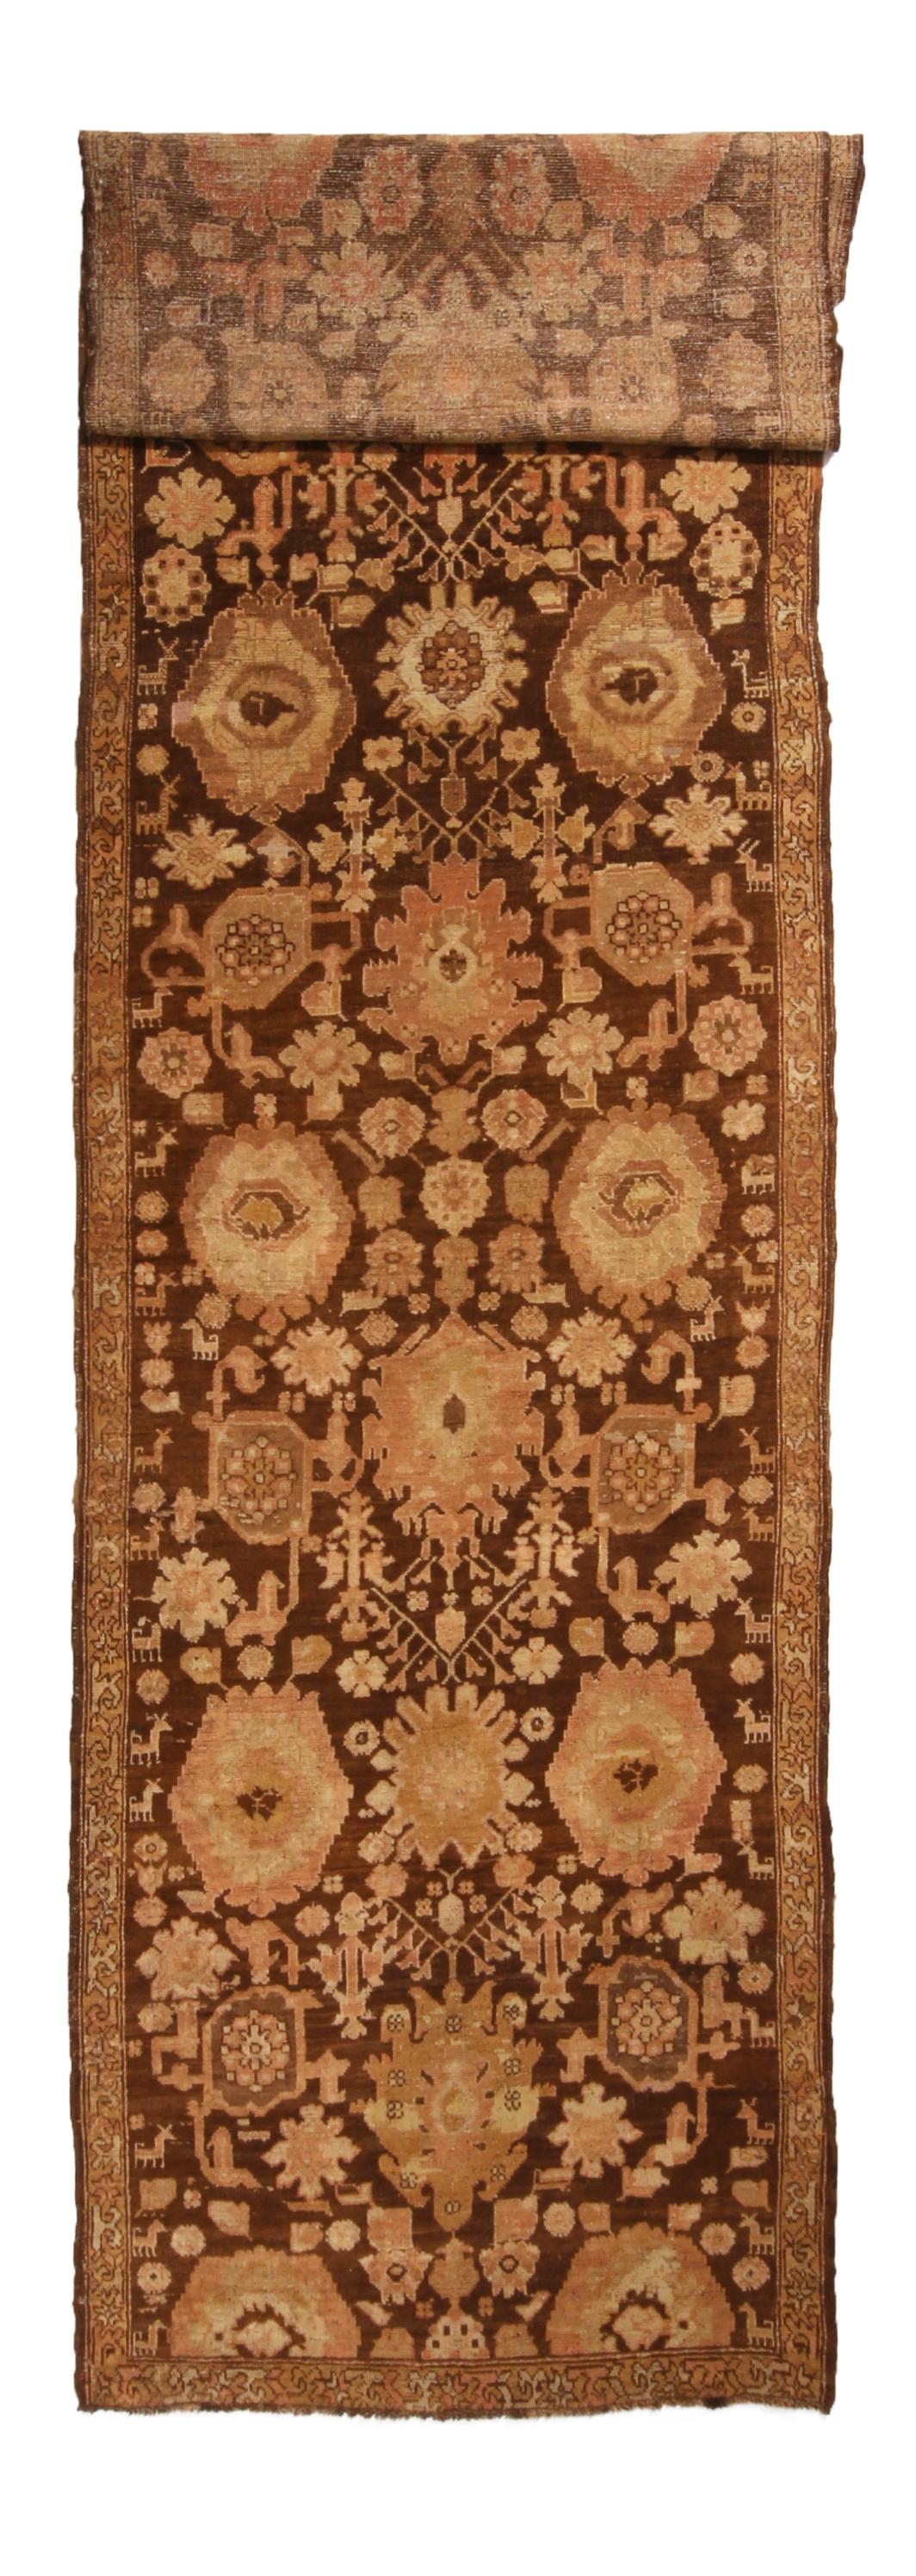 Originating from Russia in 1910, this antique Karabagh runner hosts an uncommonly fine single border, emphasizing a spacious, complementary geometric-floral series. Hand knotted in high quality, luminous wool, this textural, slightly abrash brown